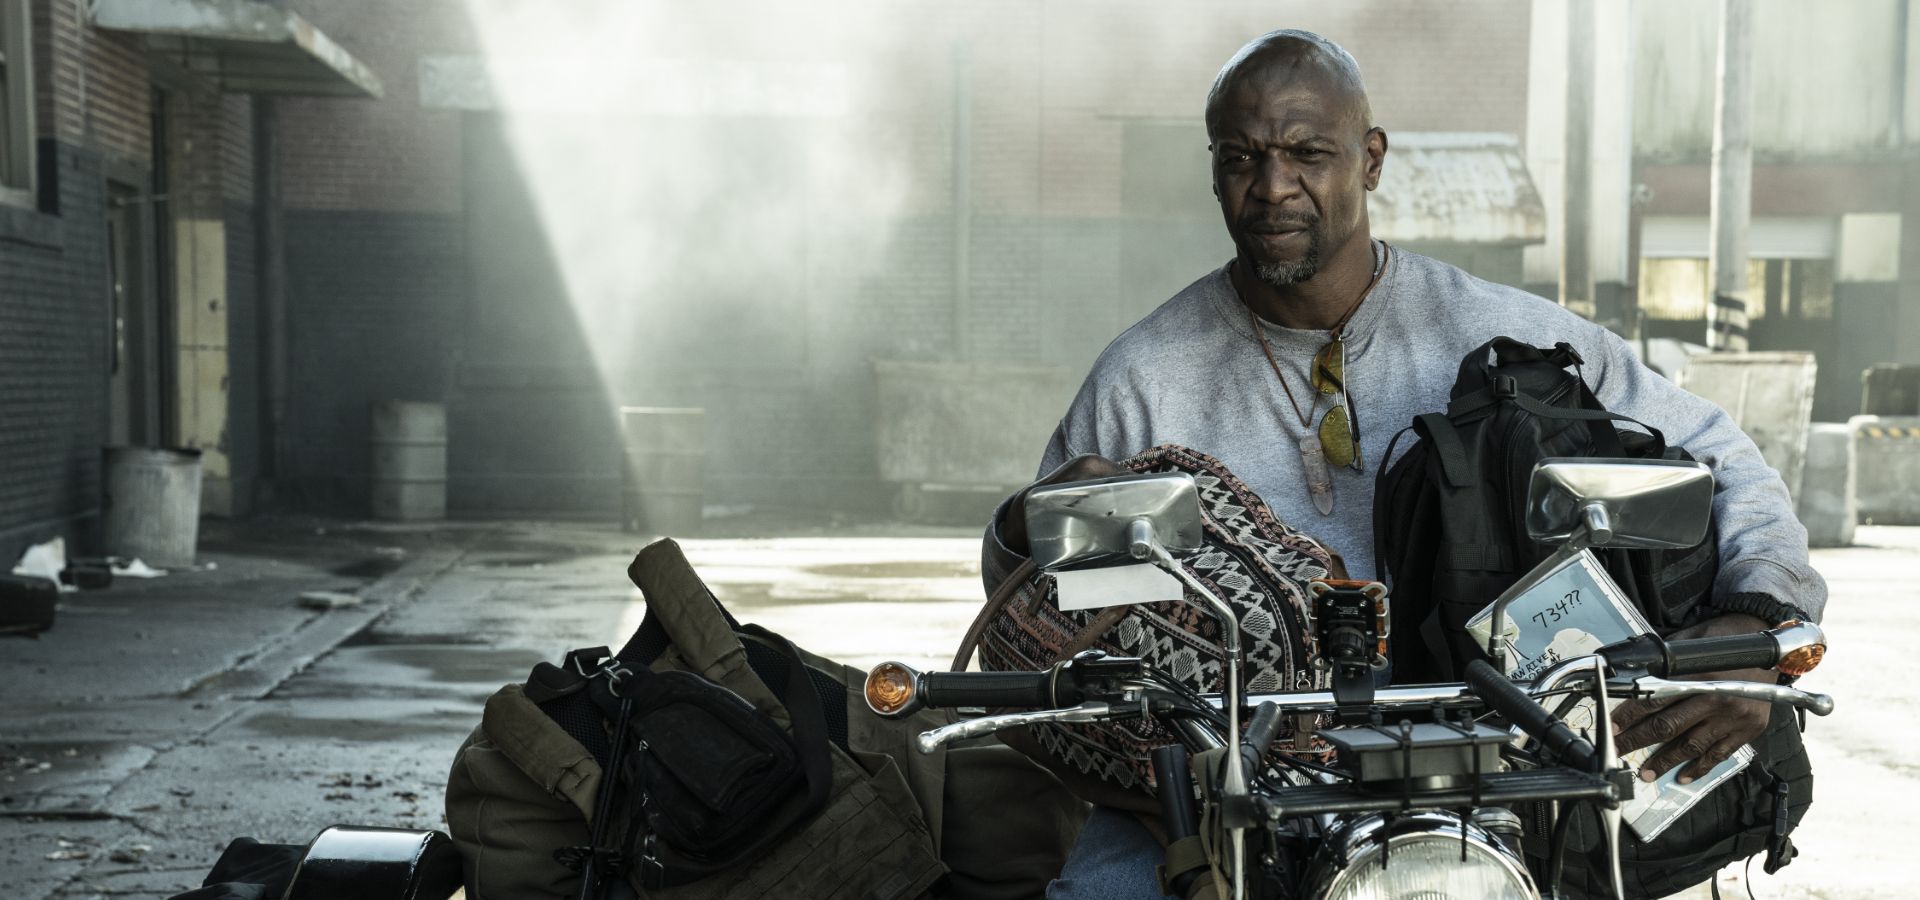 Tales of the Walking Dead Q&A — Terry Crews Joins the Walking Dead Family And He Couldn’t Be Happier 